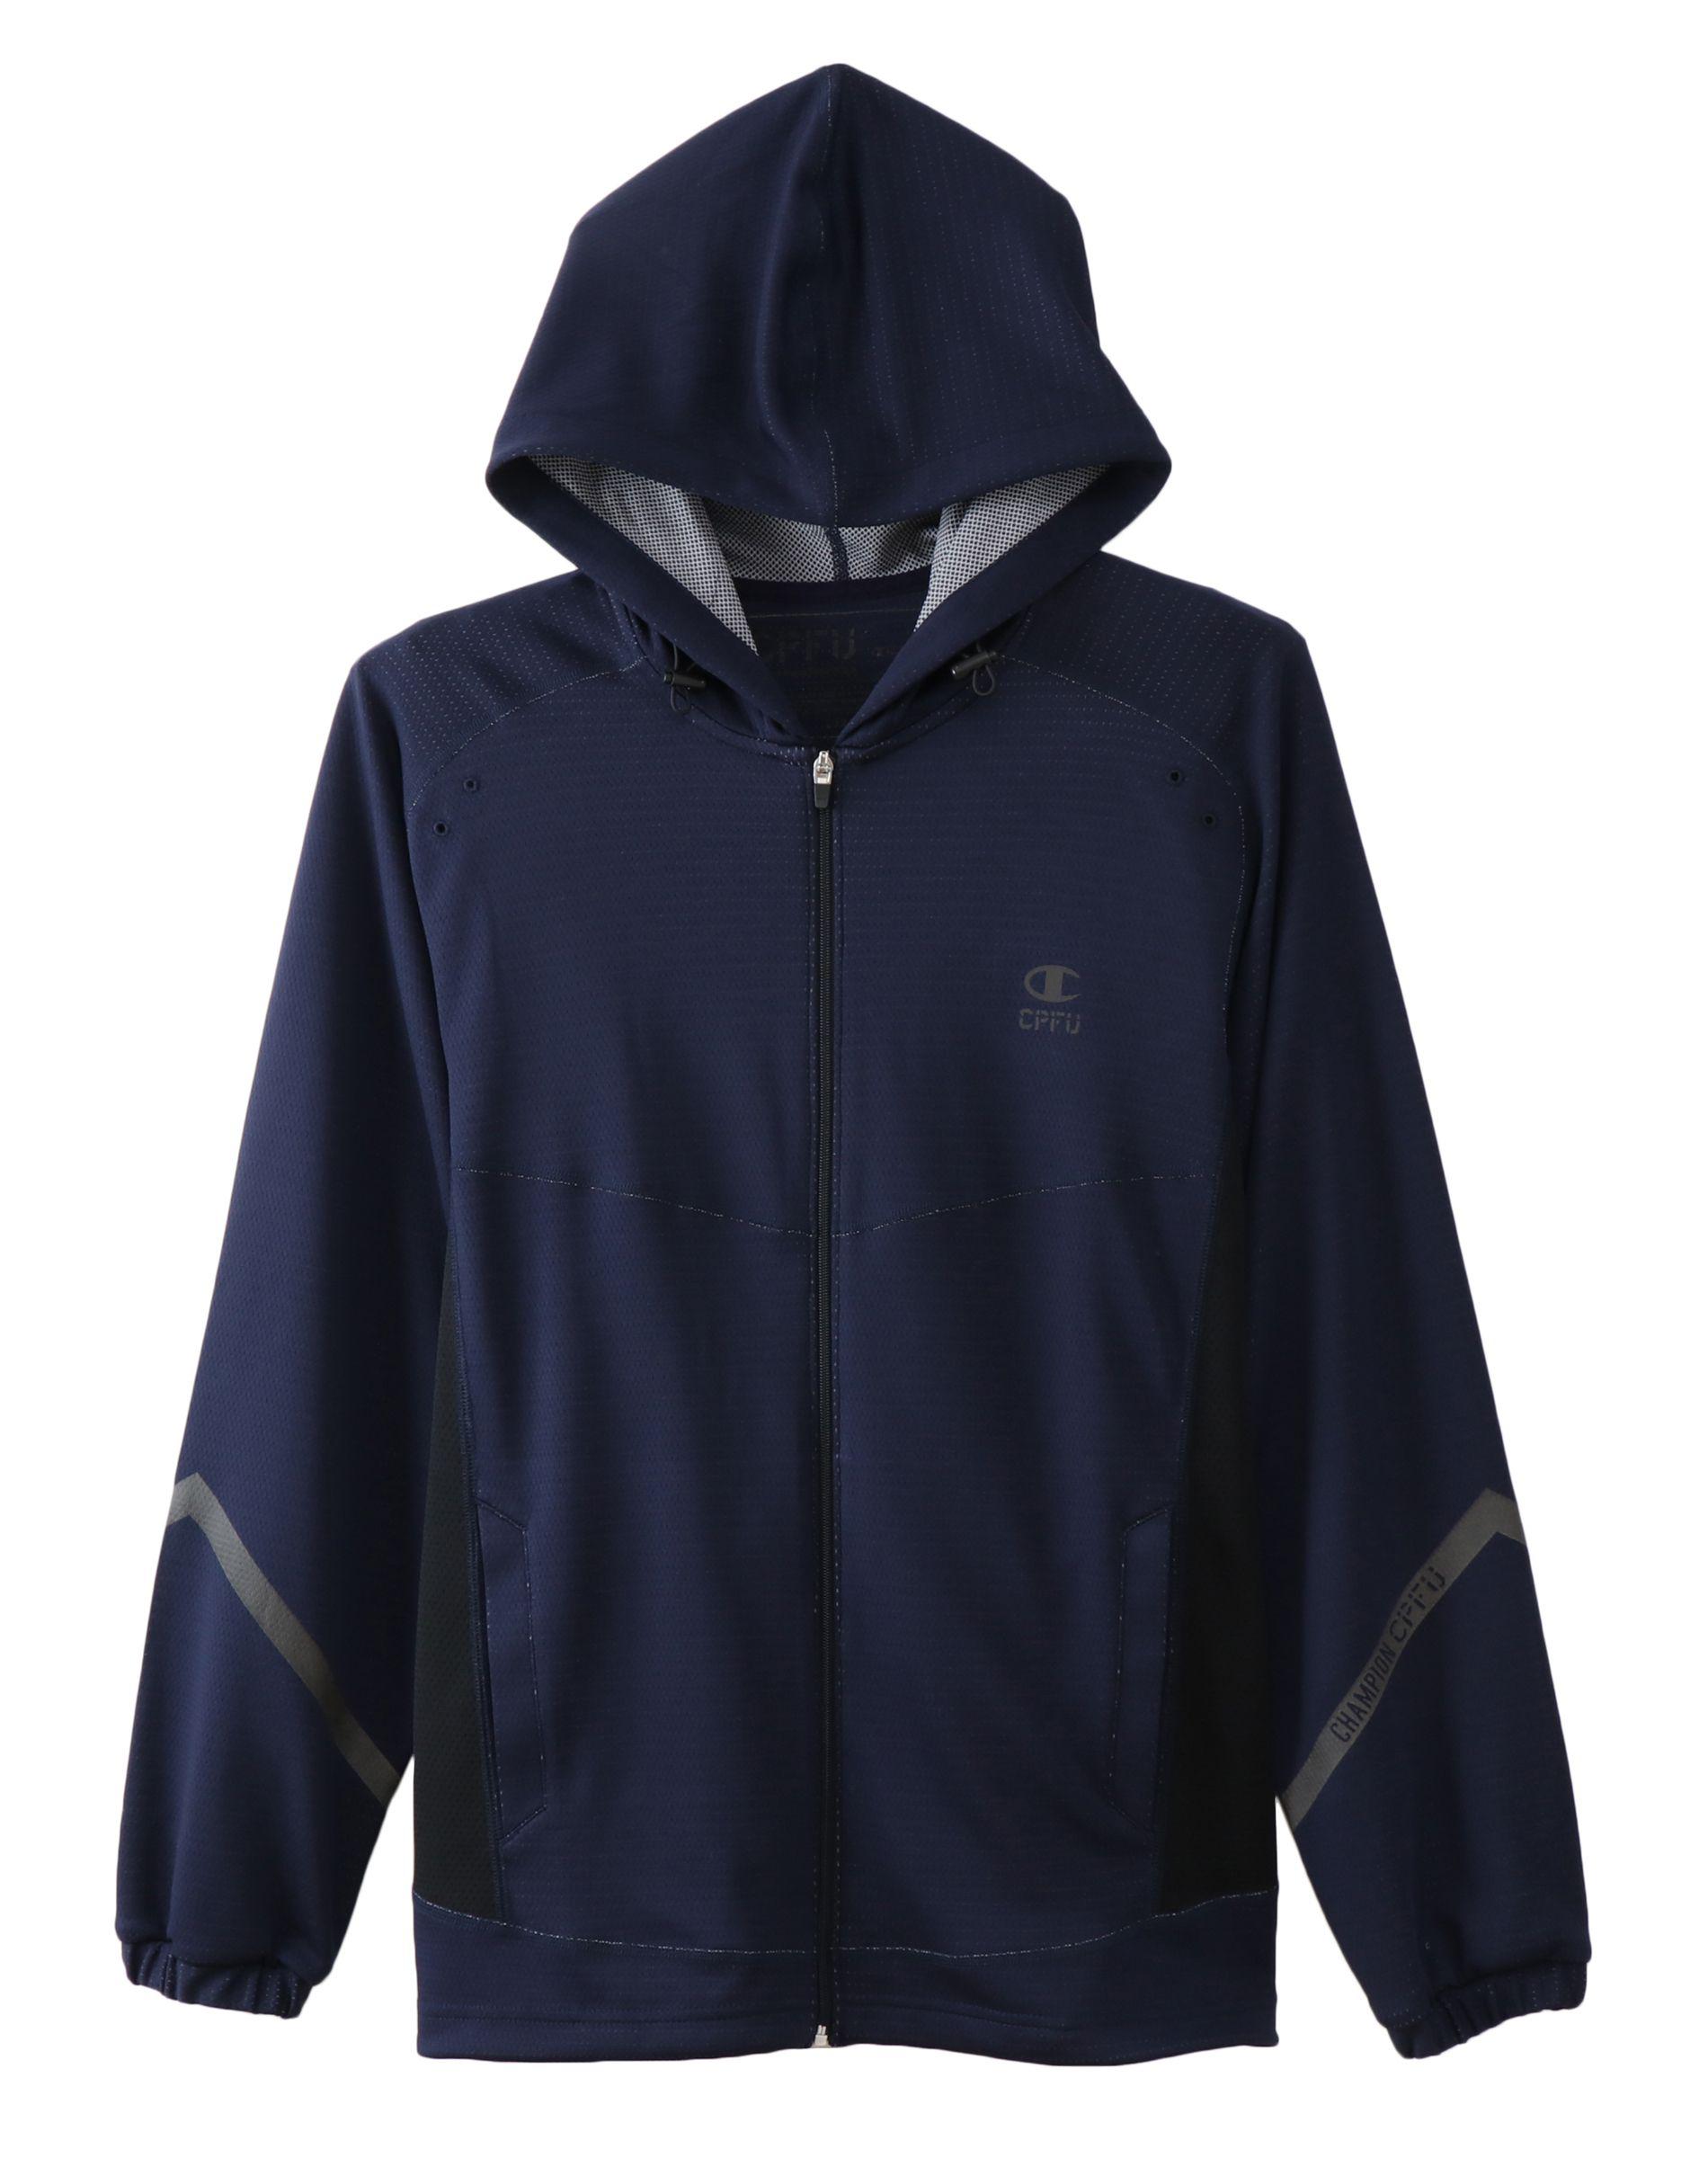 Champion Synthetic Japan Premium Cpfu Zip Jacket In Navy Blue For Men Lyst